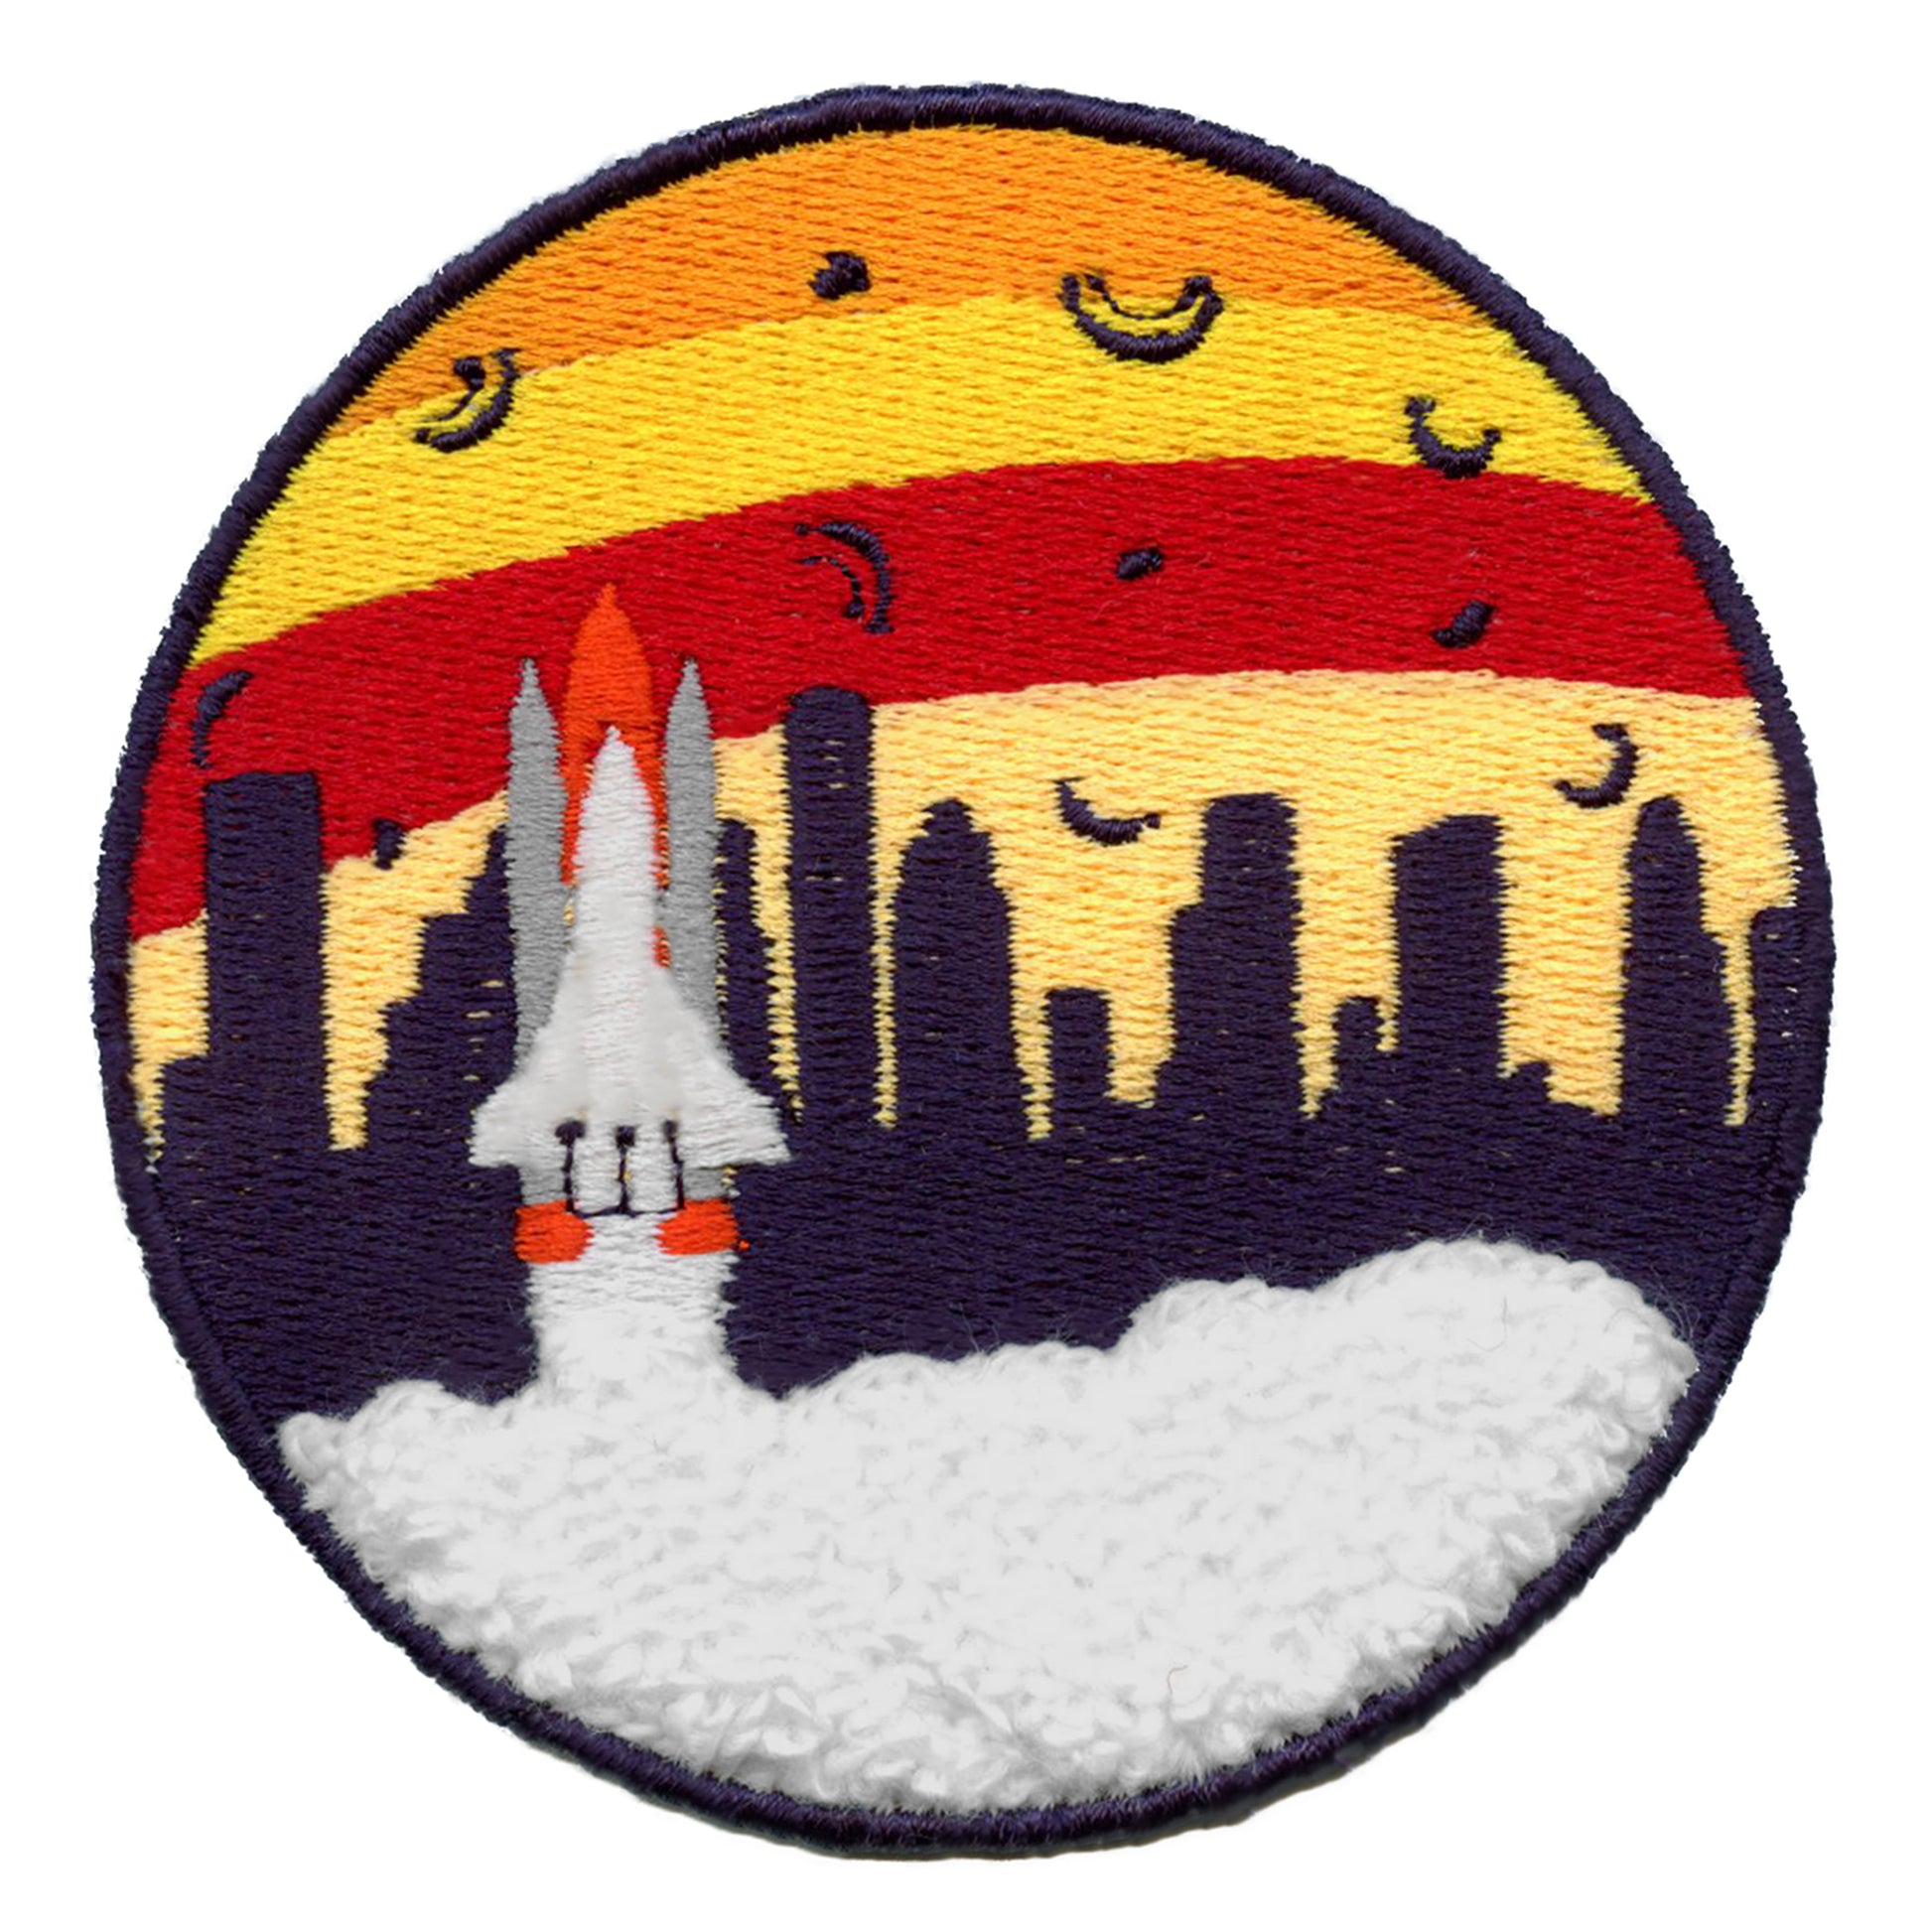 Custom Patches for Jackets - Houston Embroidery Service